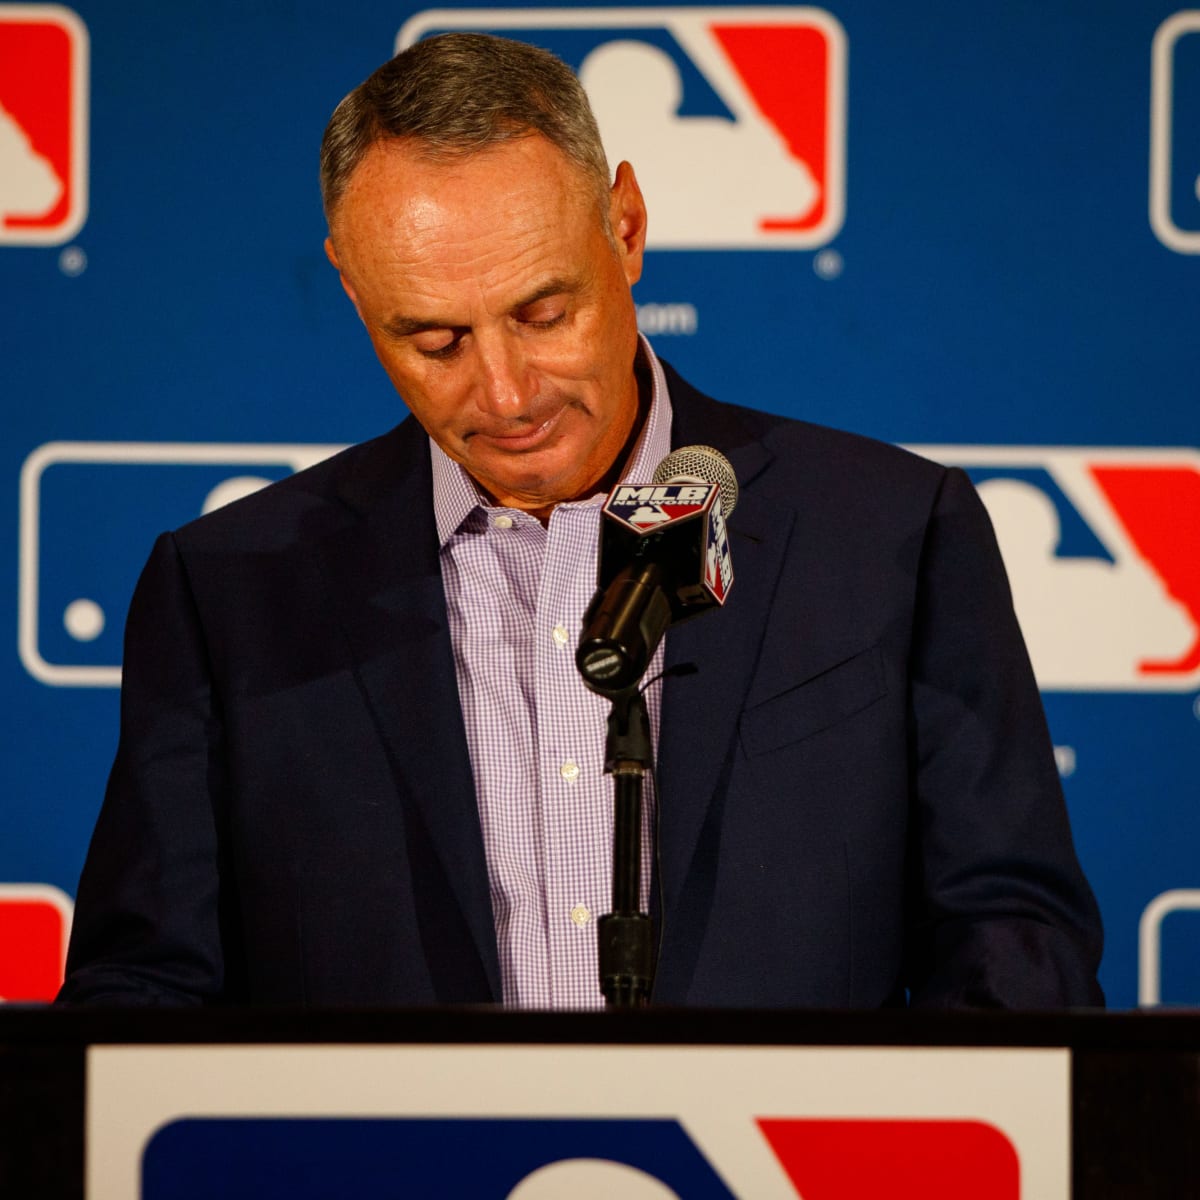 Fired by Mets in Houston Astros cheating scandal to landing front